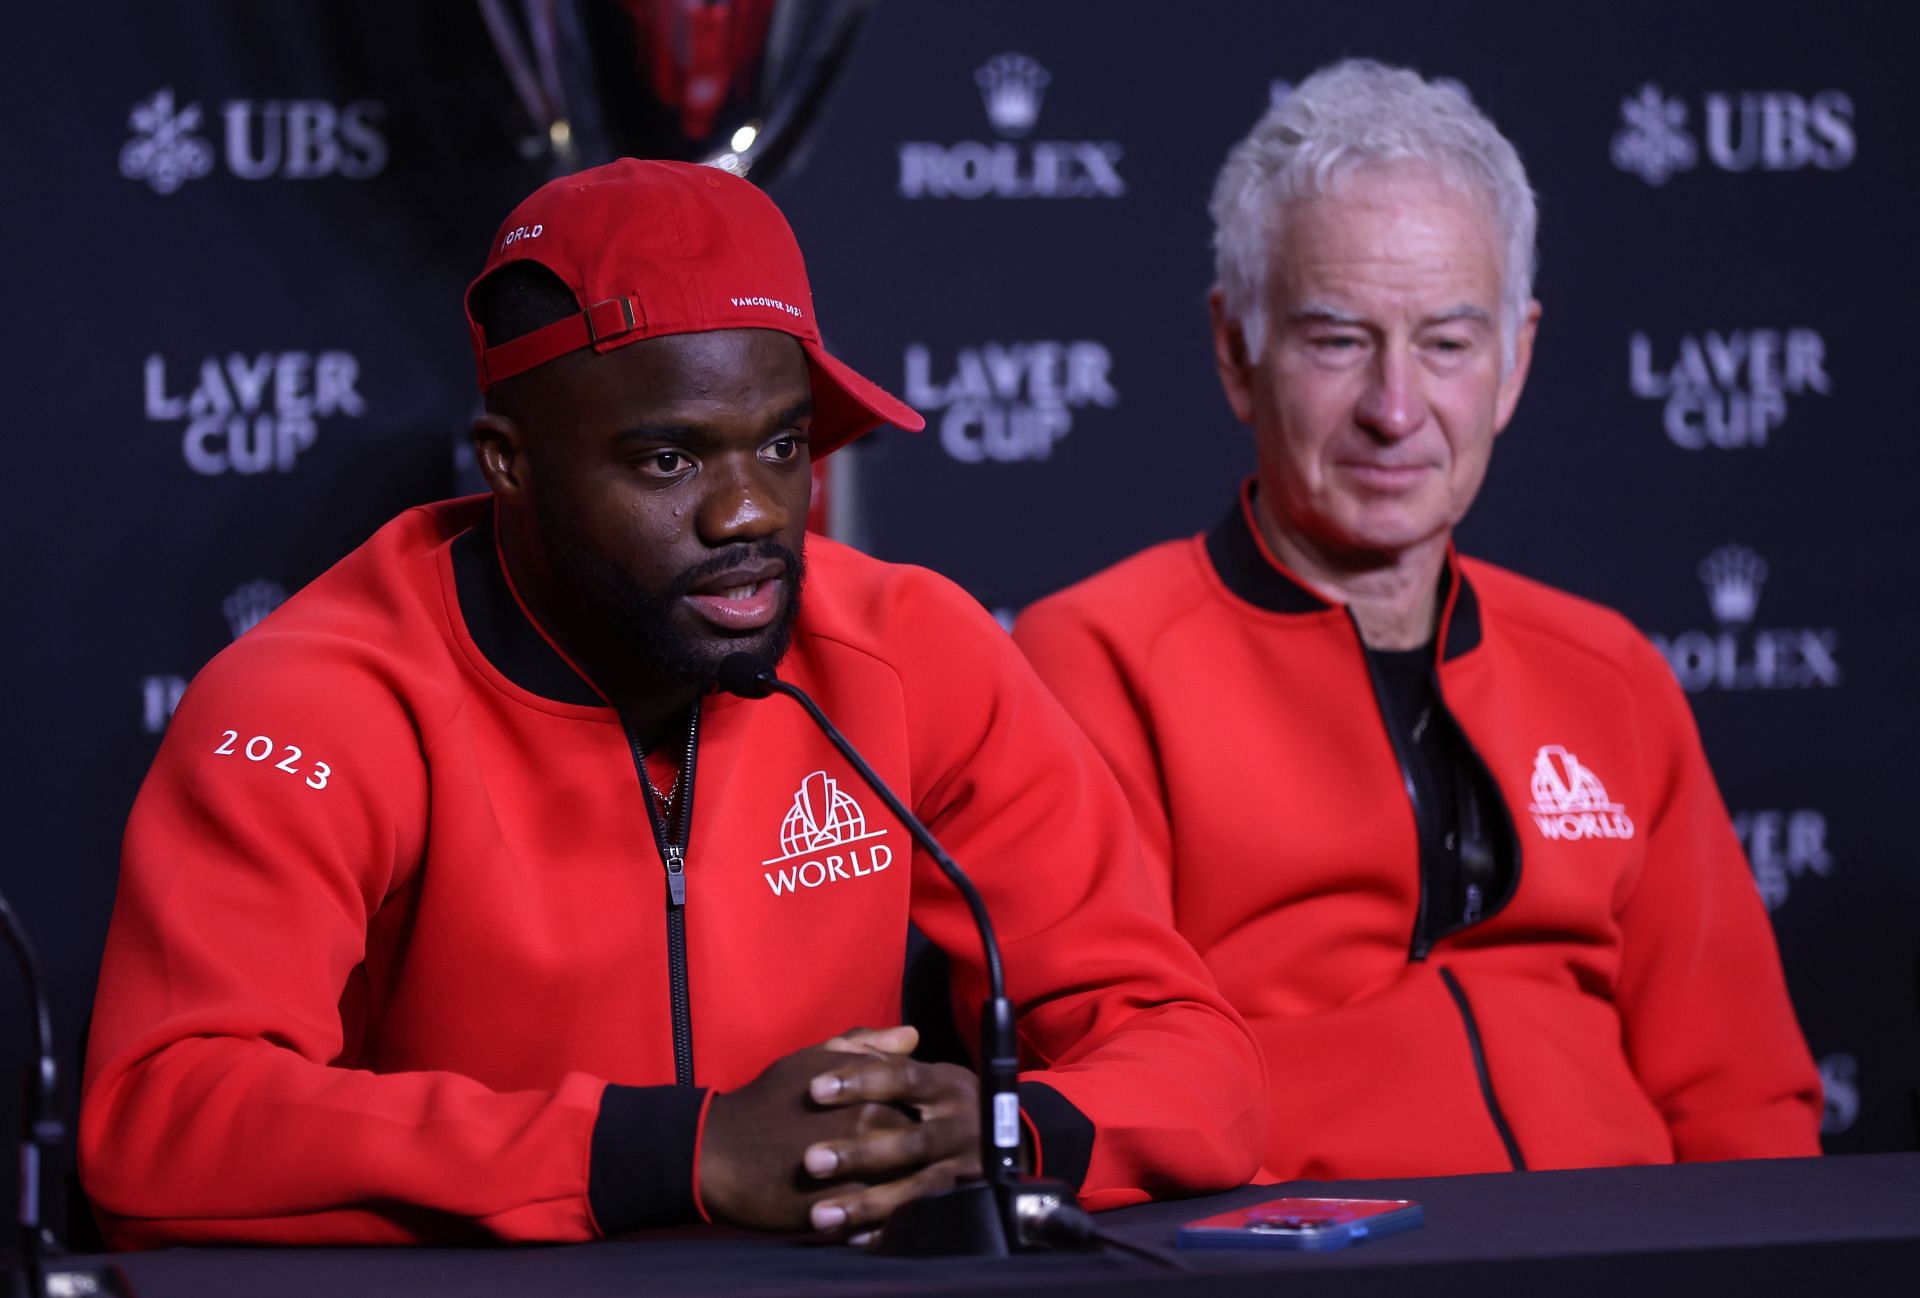 John McEnroe and Frances Tiafoe after winning the Laver Cup